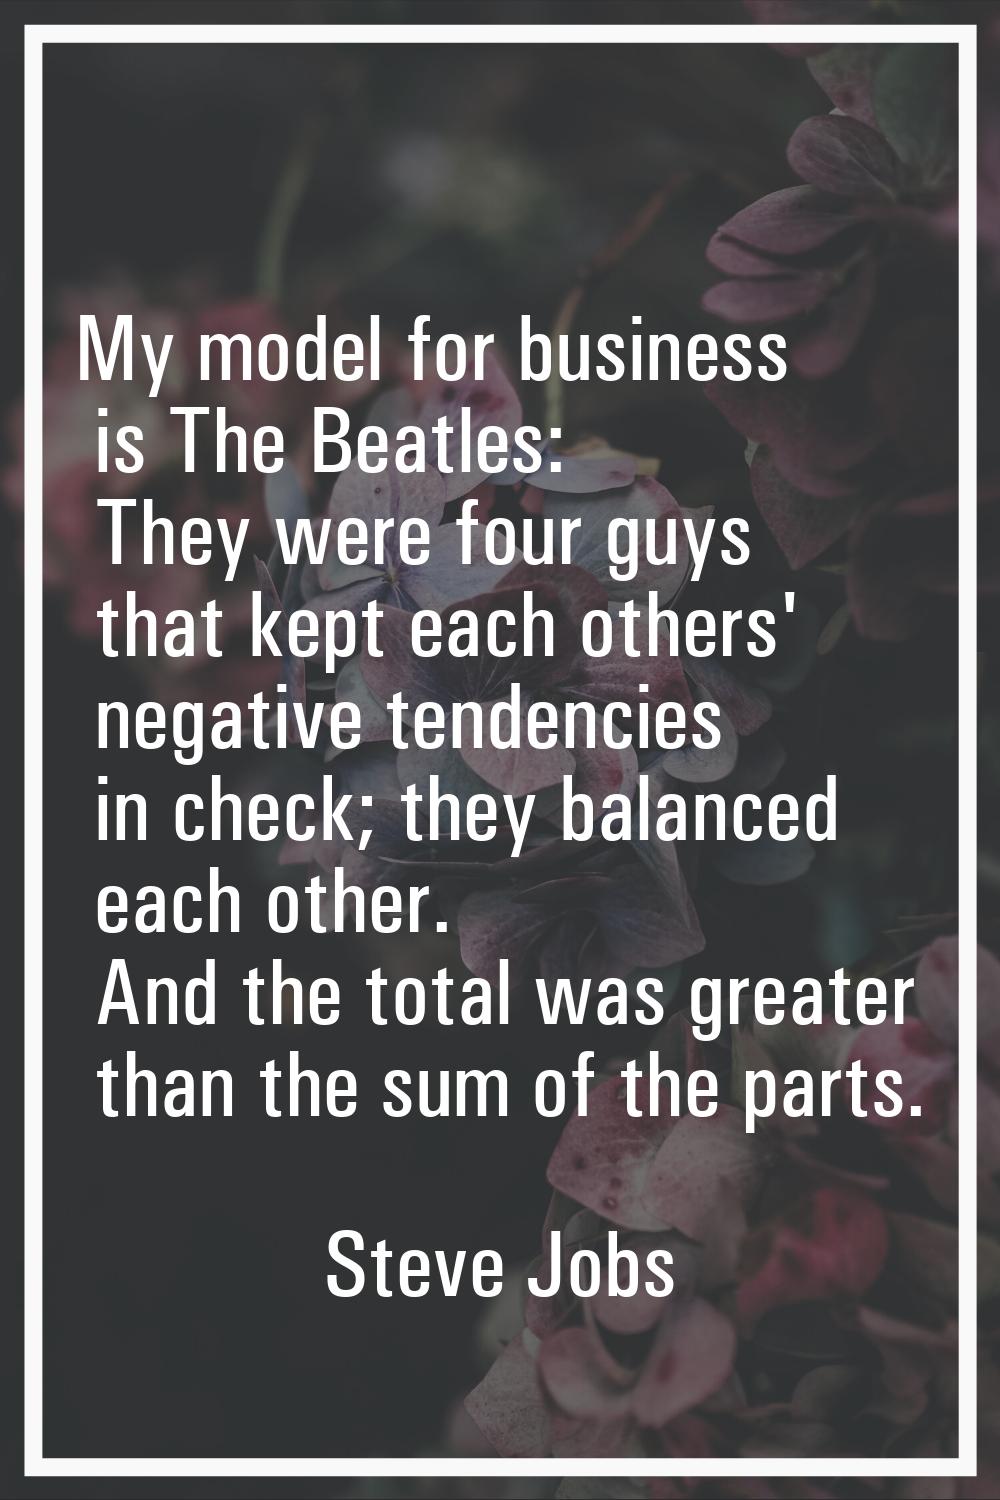 My model for business is The Beatles: They were four guys that kept each others' negative tendencie